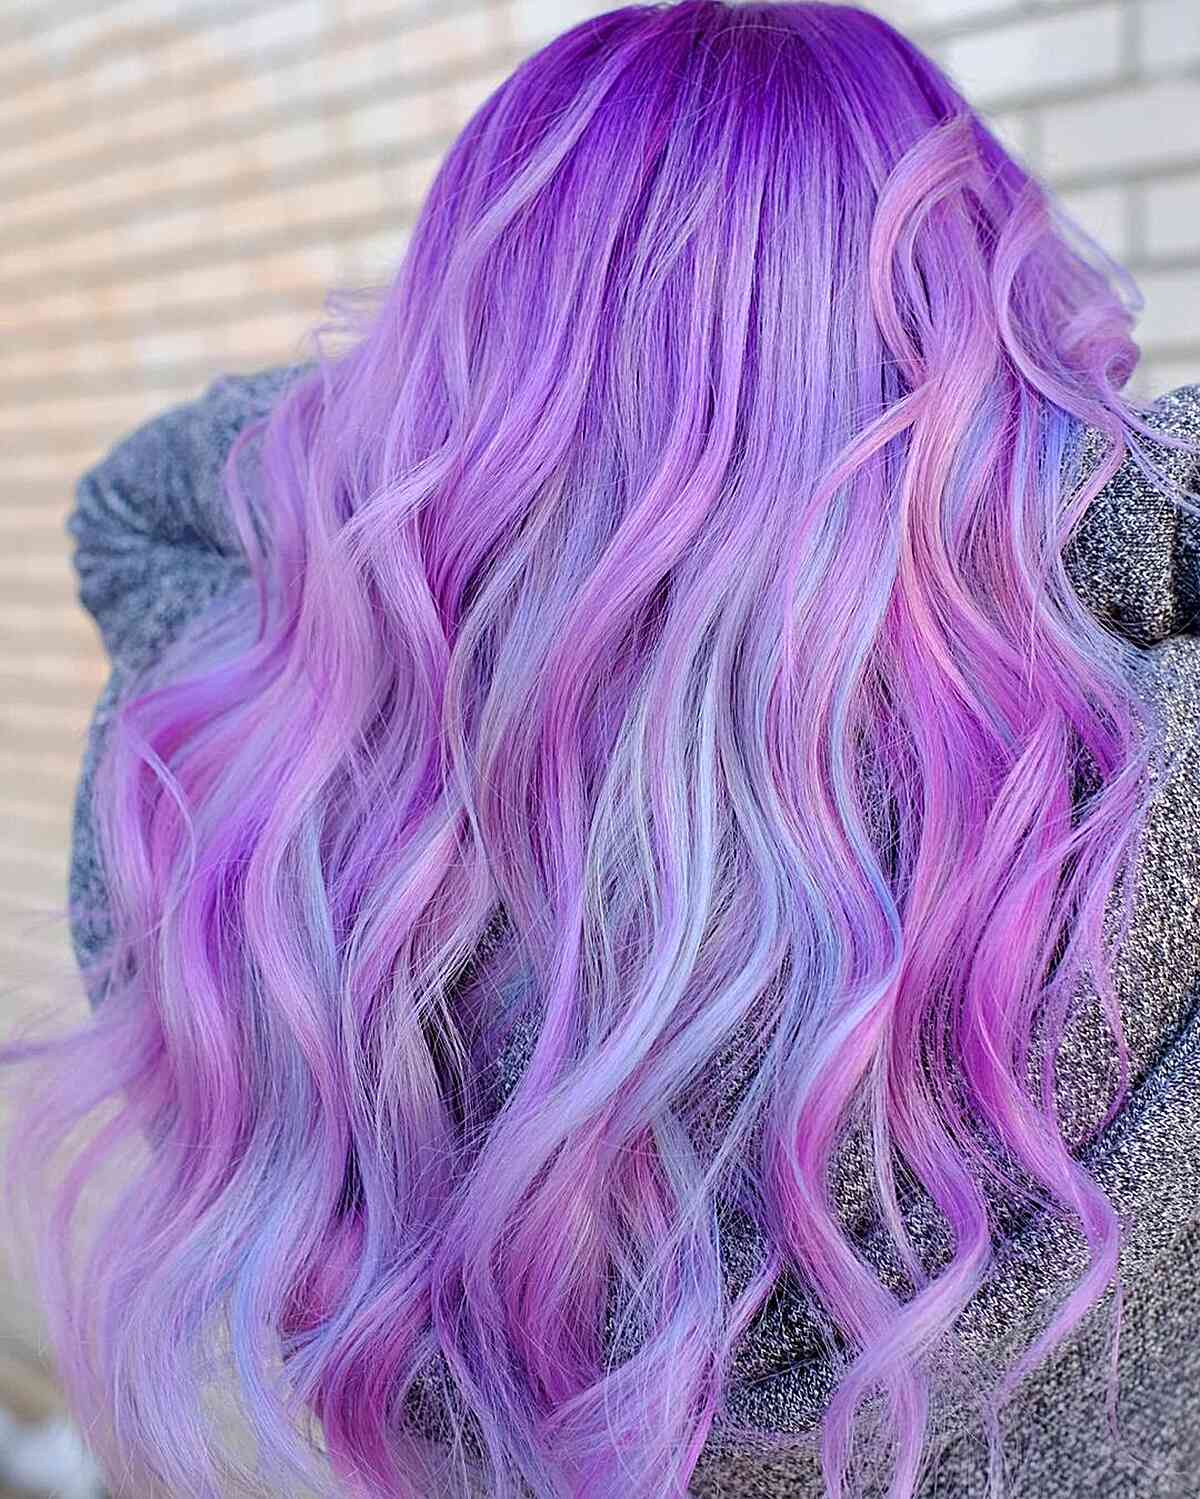 Melted Purple Cotton Candy Shade for Longer Hair